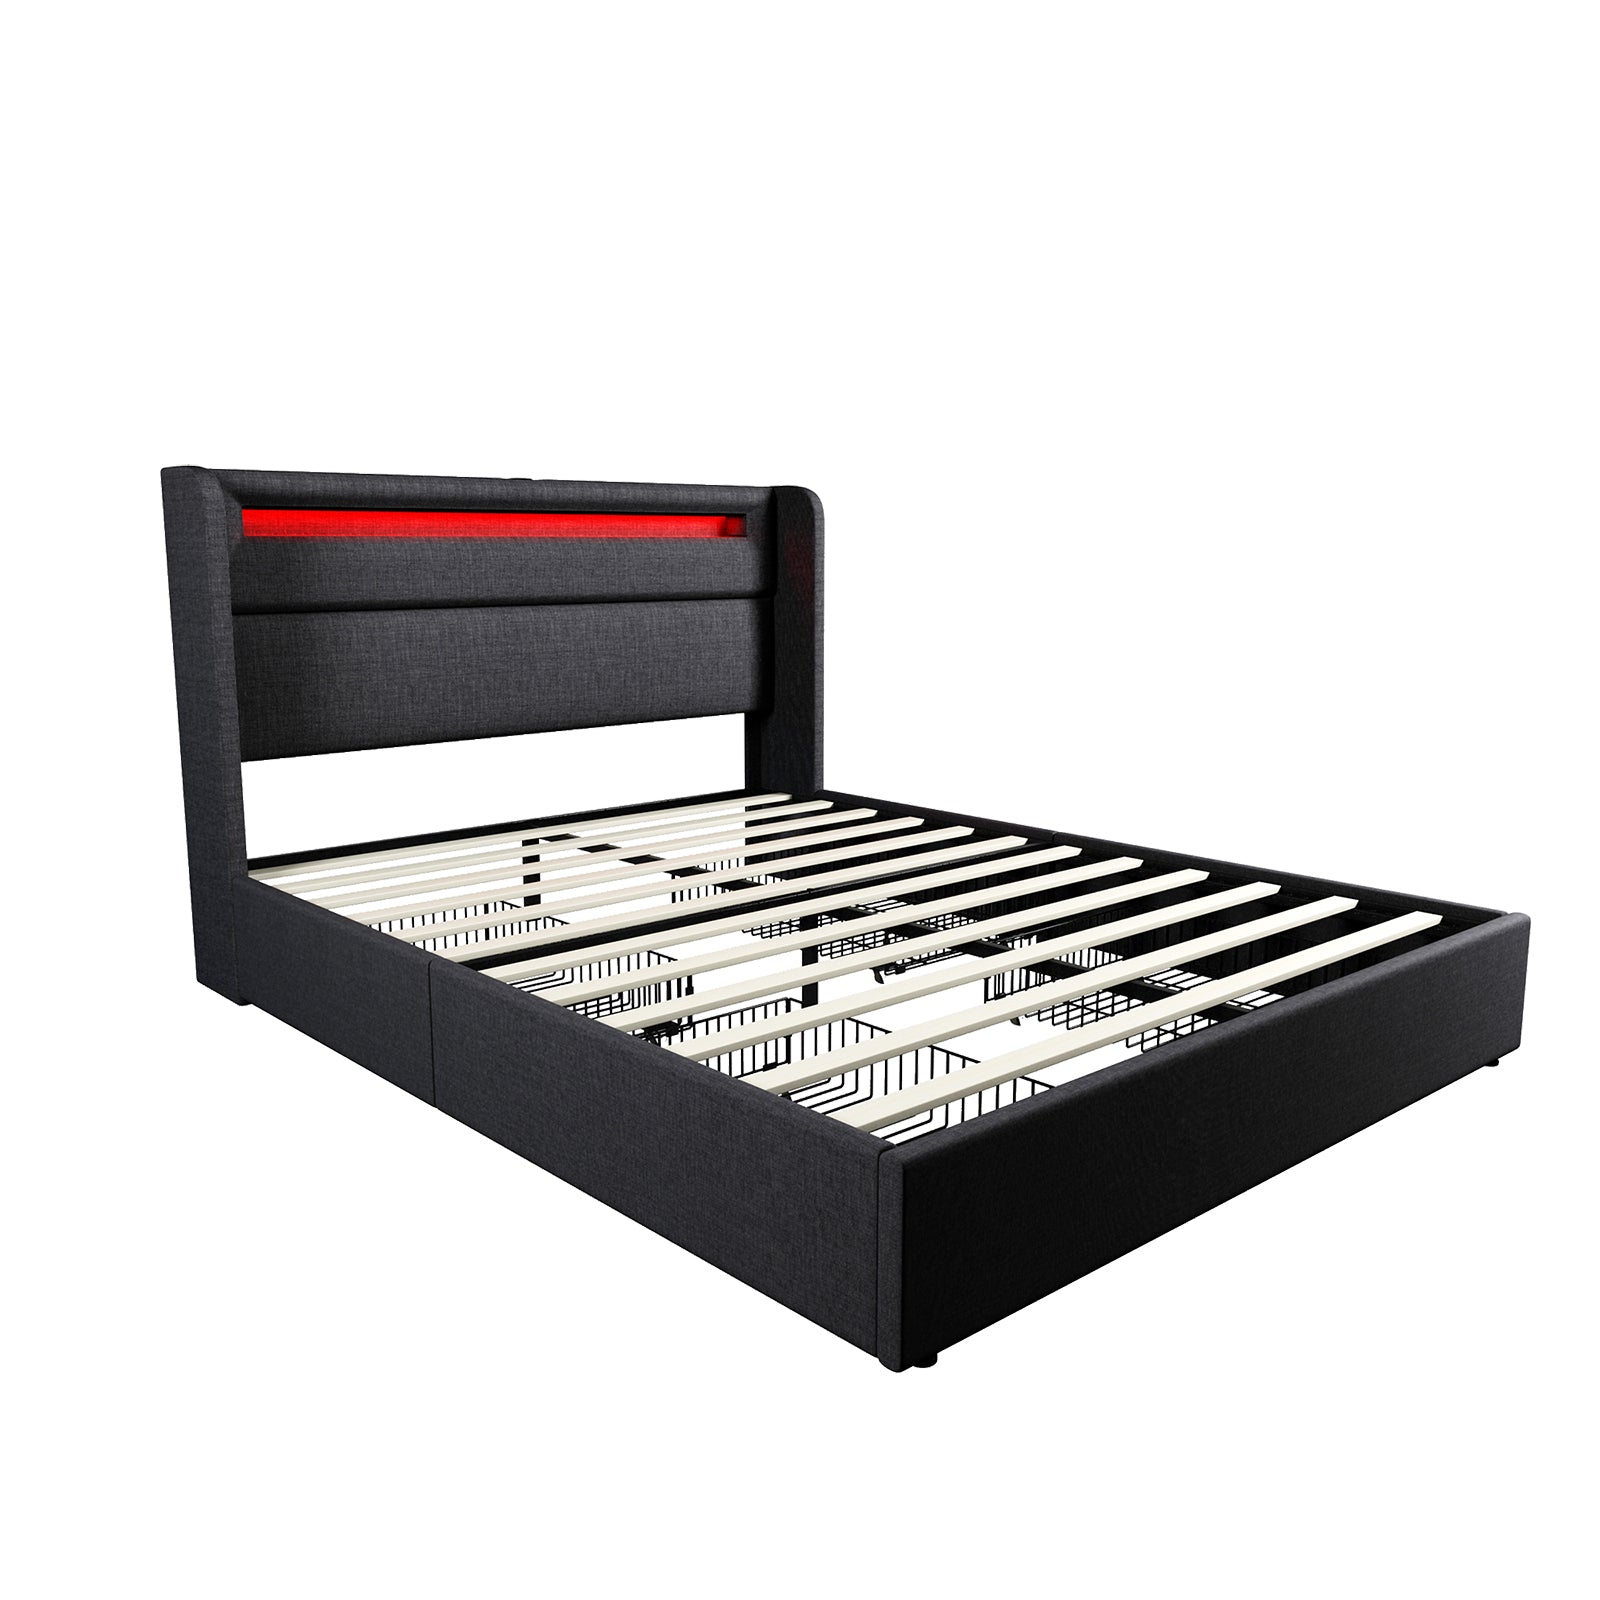 A side view of the Albion King in Dark Grey with visible mattress slats and the integrated LED headboard illuminated in red